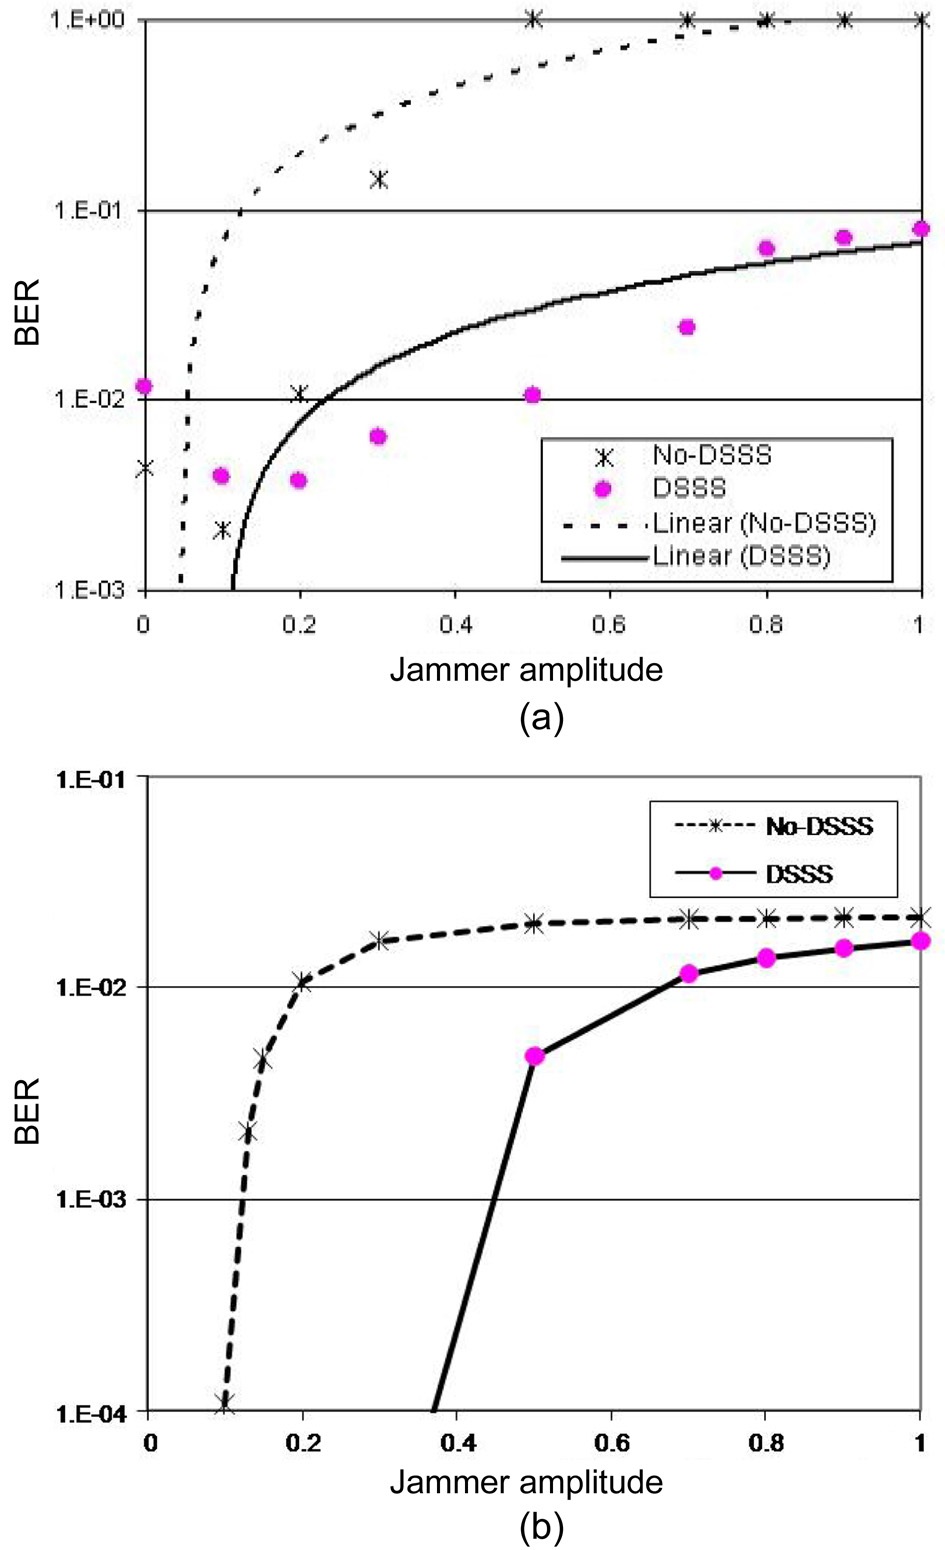 Bit error rate (BER) versus jammer amplitude; the spread sequence length can be adapted depending on the jammer condition, including its amplitude. (a) Experimental results and (b) theoretical results. DSSS: direct sequence spread spectrum.